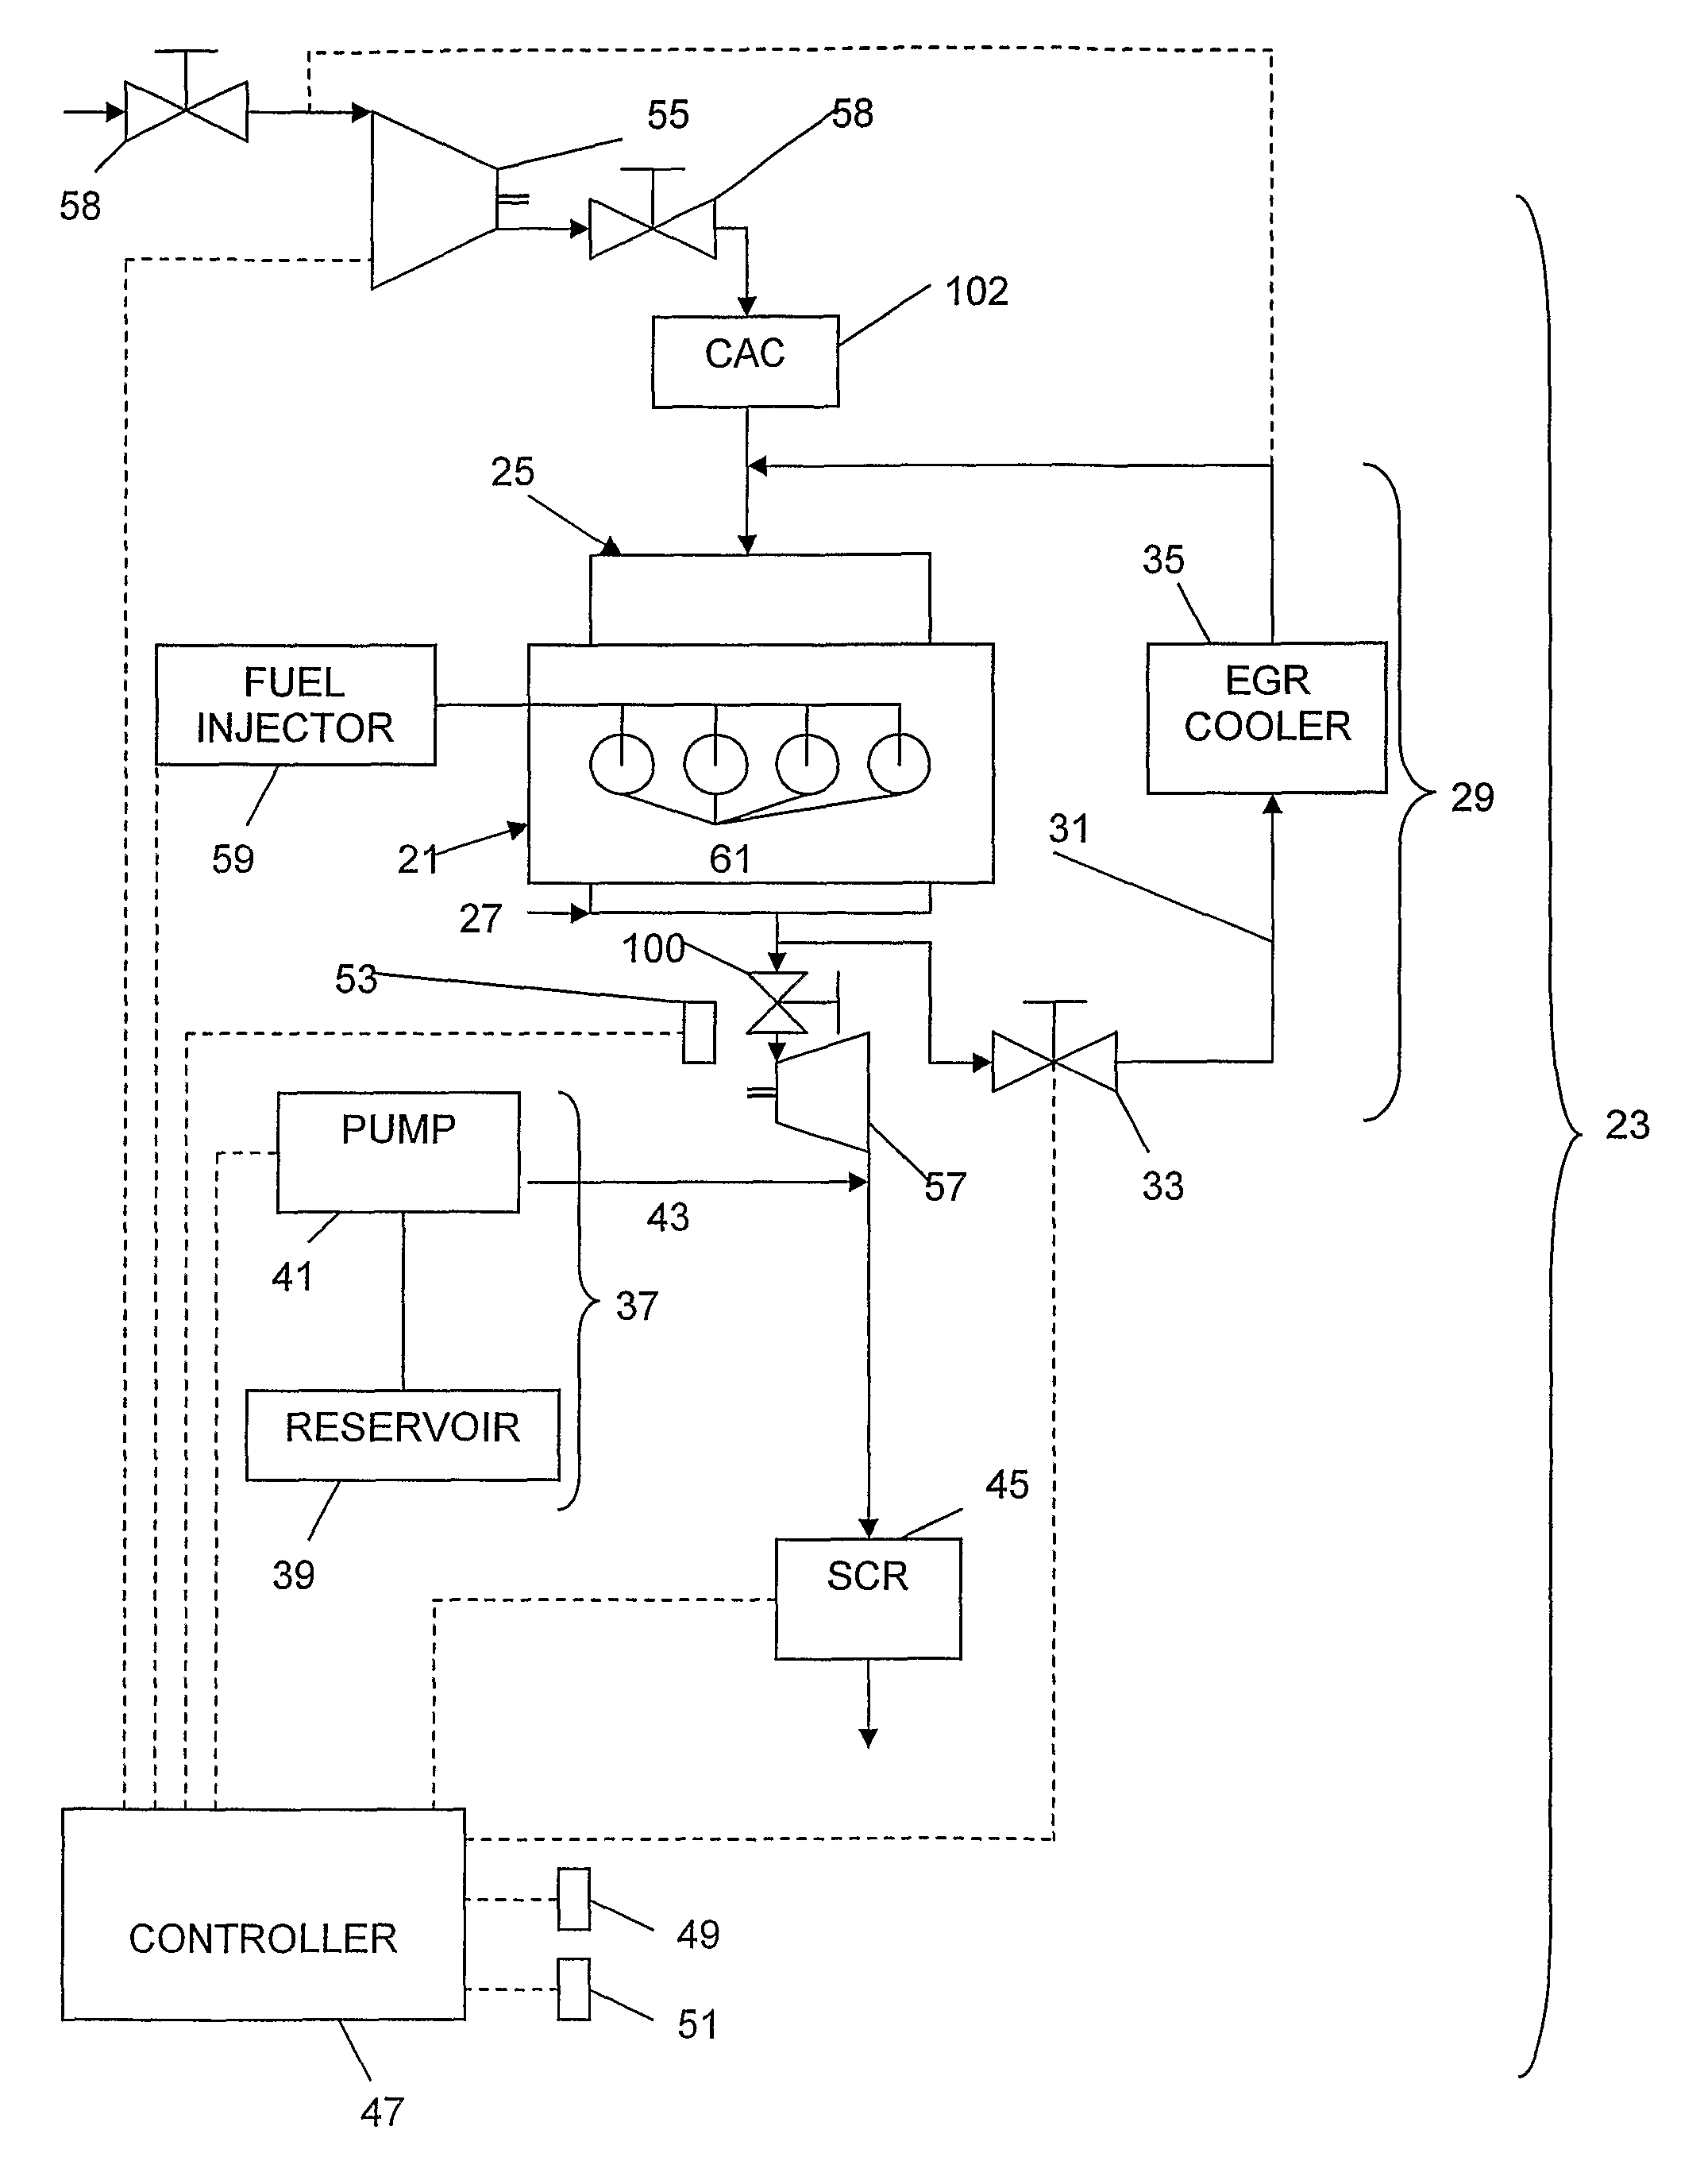 Engine with emissions control arrangement and method of controlling engine emissions